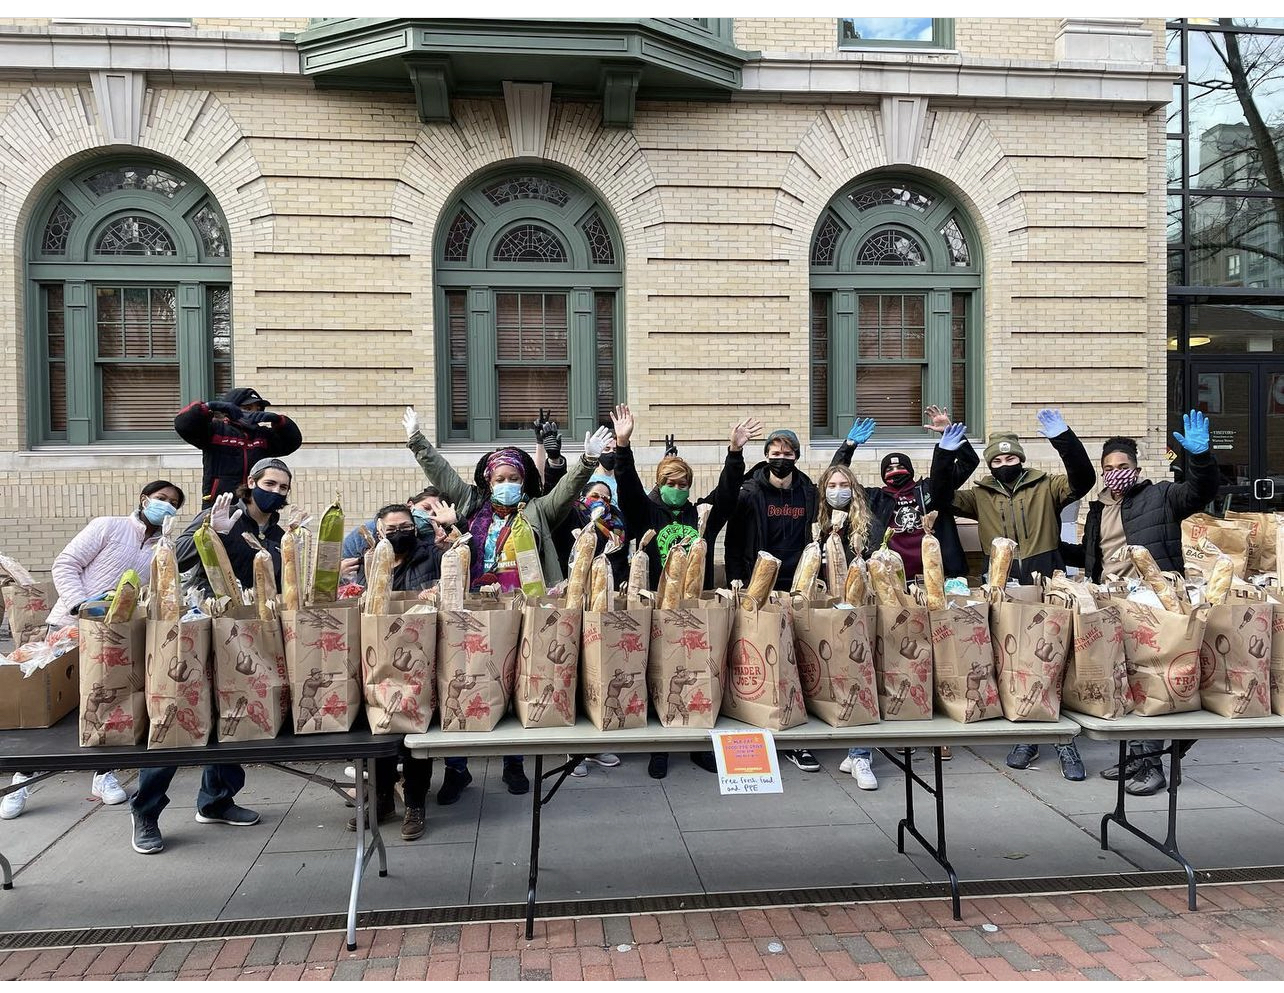 We provide a weekly food distribution where we create grocery bags filled with nutritious foods to provide families and individuals in need.  All are welcome to grab a bag of love!